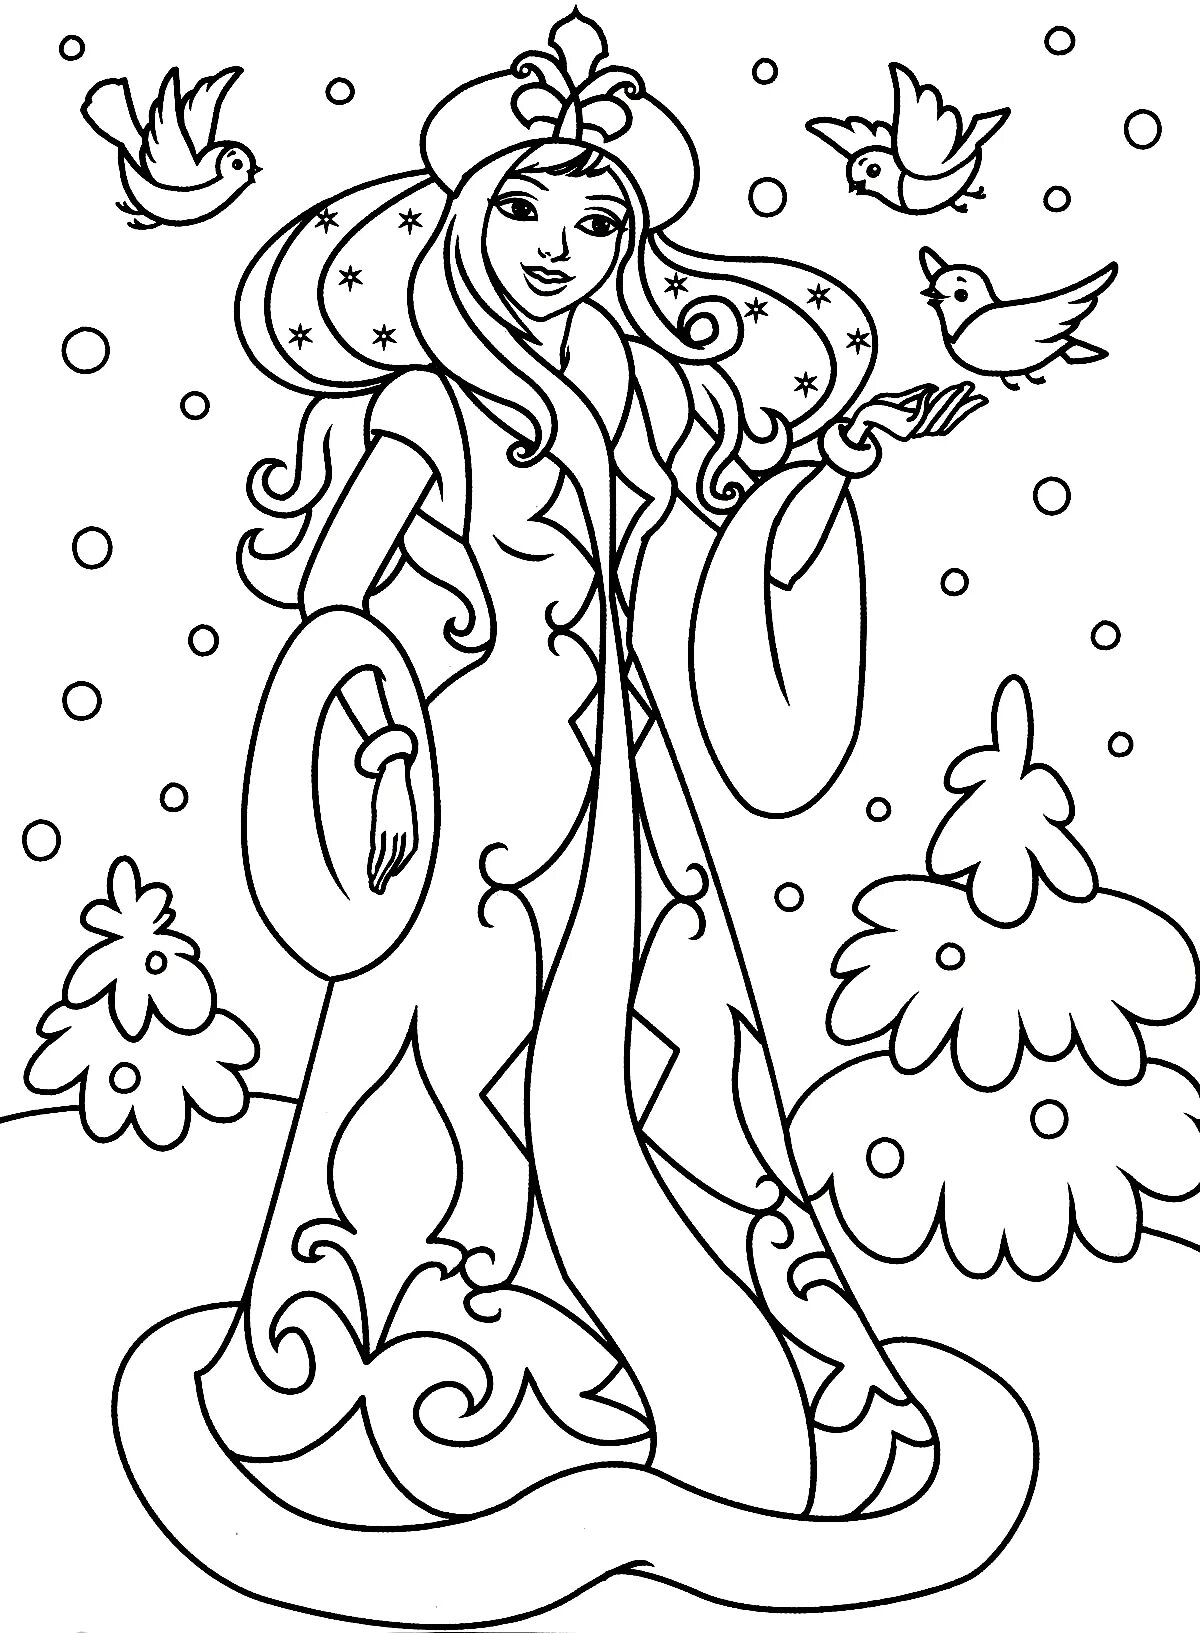 Live coloring for girls winter